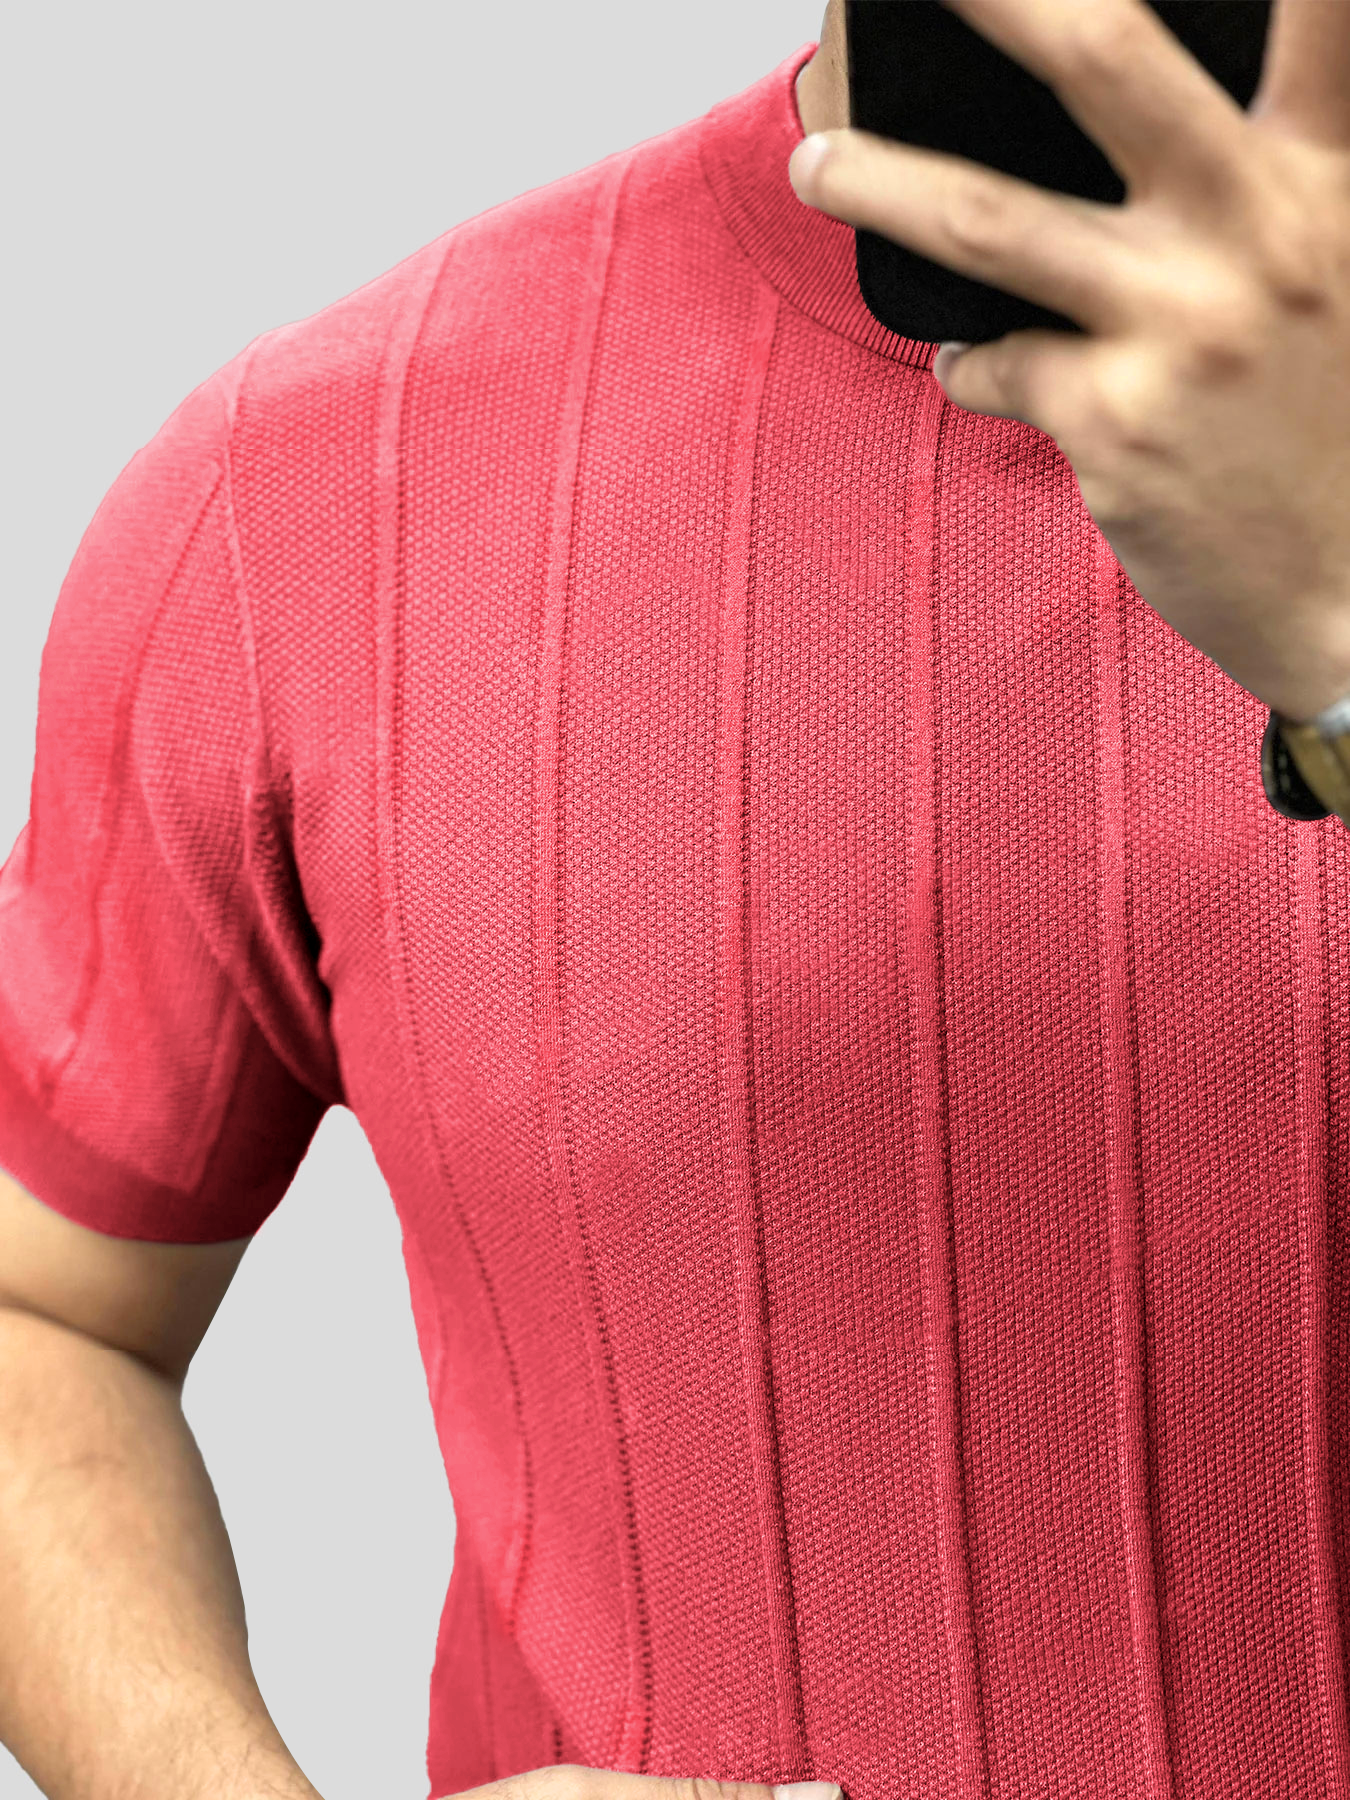 GentleKnit Breathable Striped Short Sleeve Knitted T-Shirt